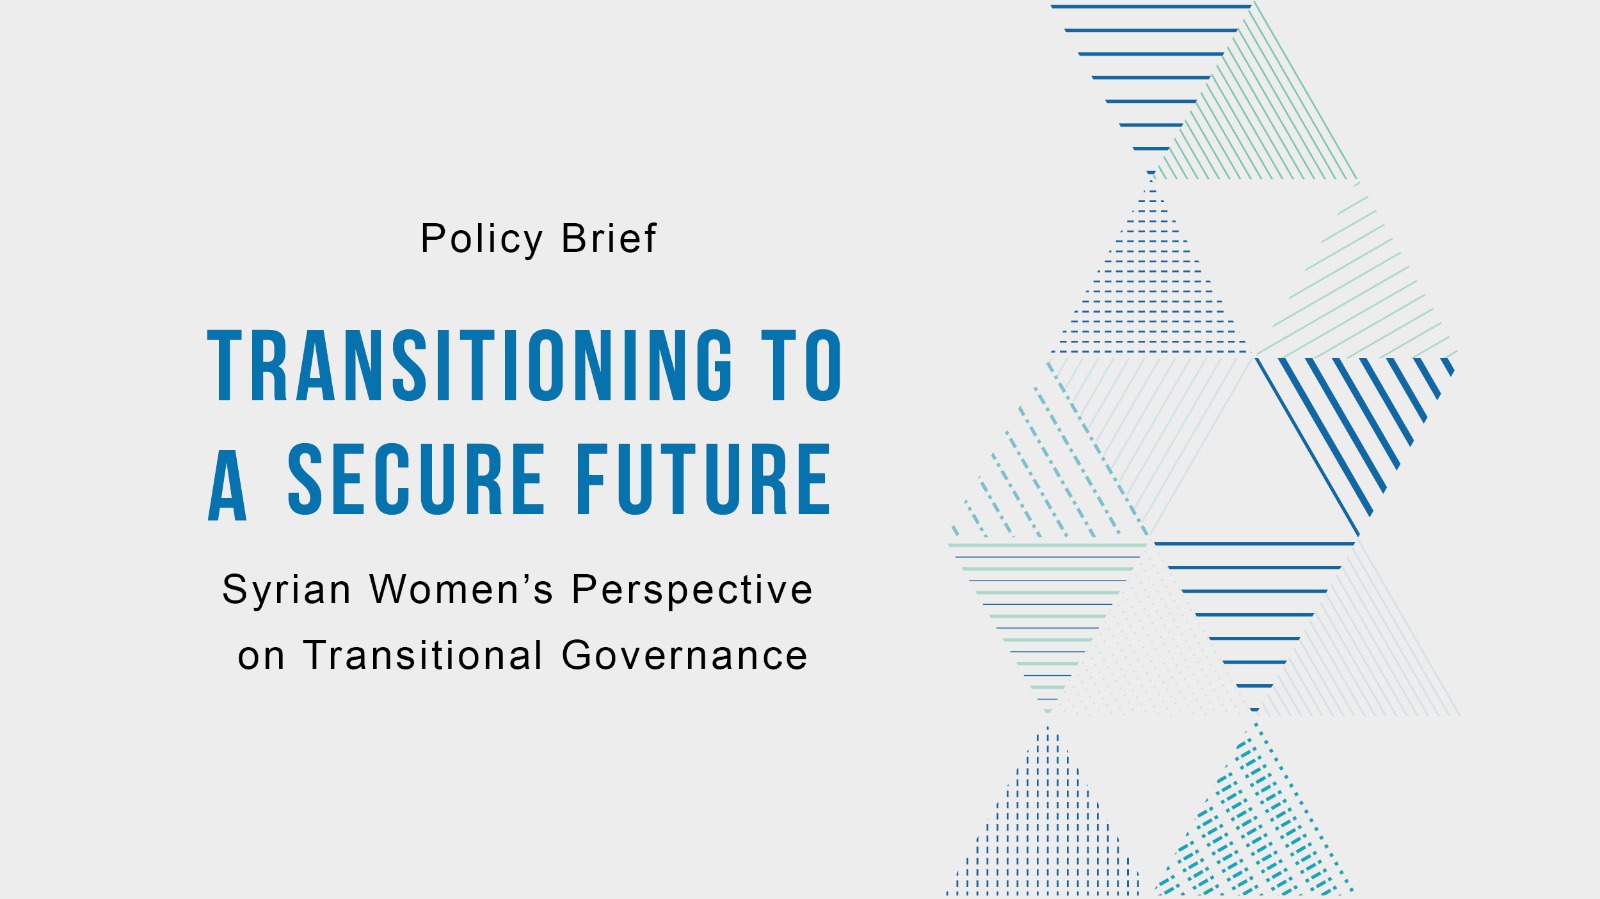 Policy Brief: Transitioning to a Secure Future – Syrian Women’s Perspective on Transitional Governance